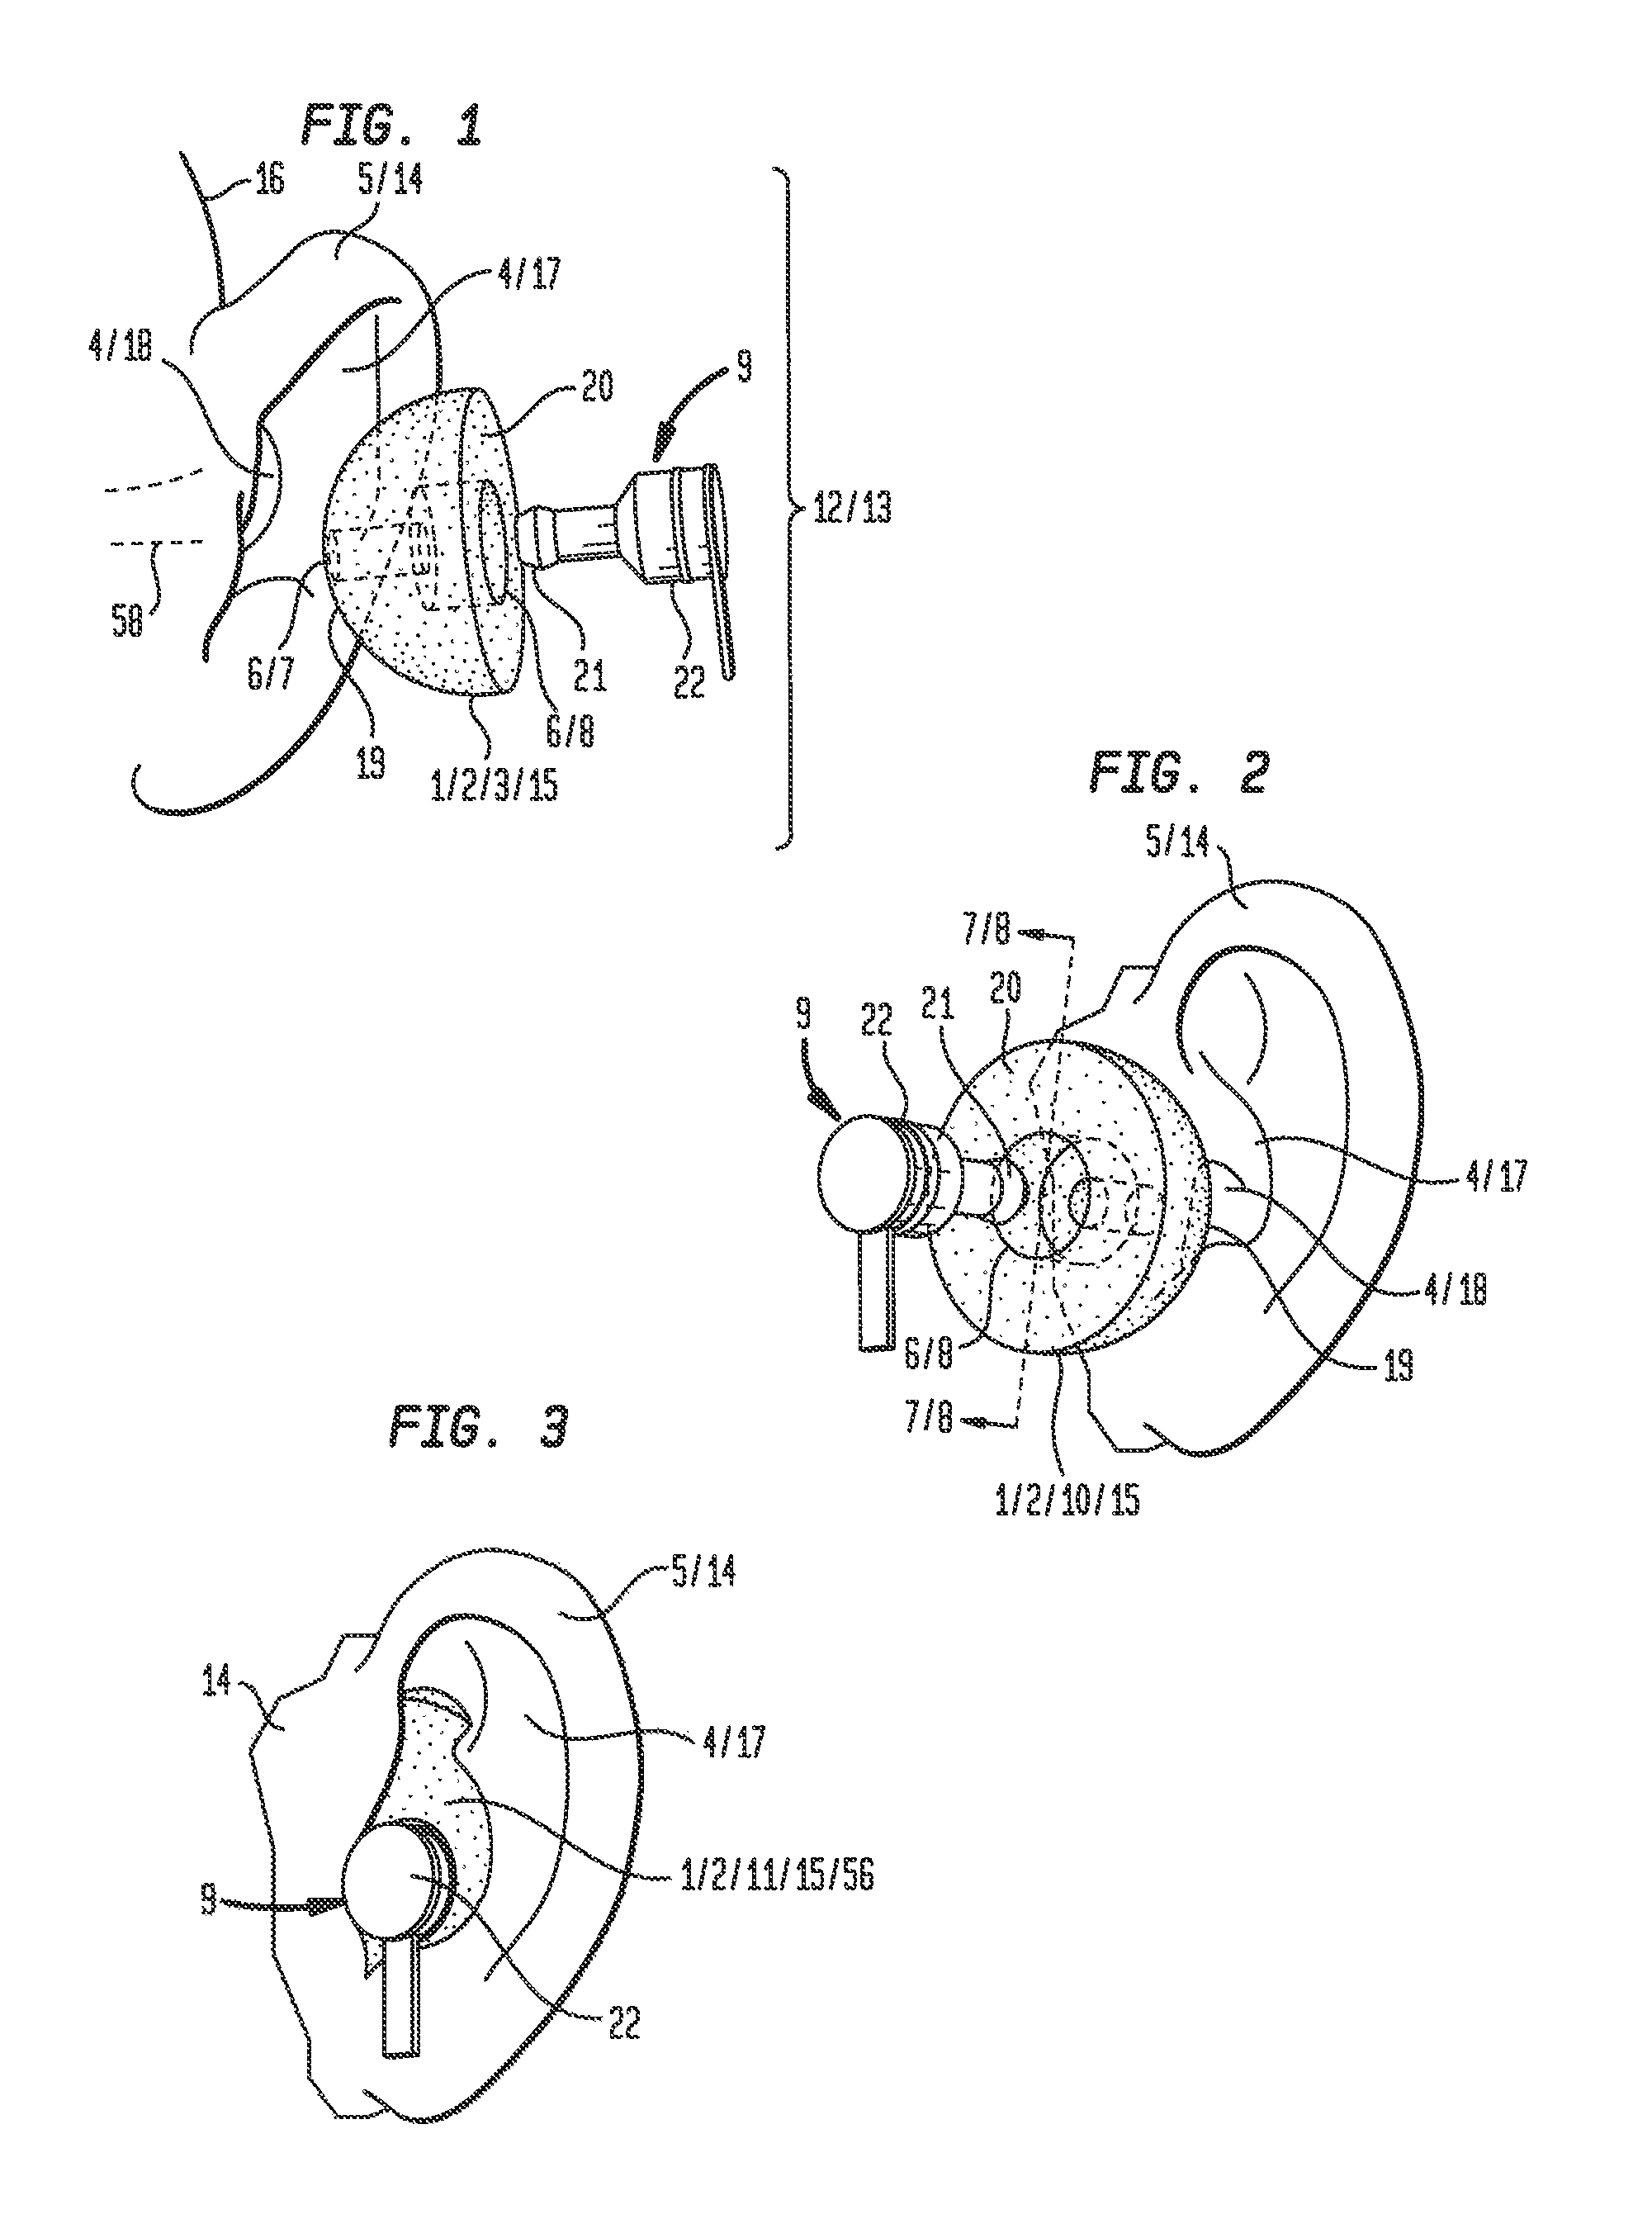 Moldable earpiece system